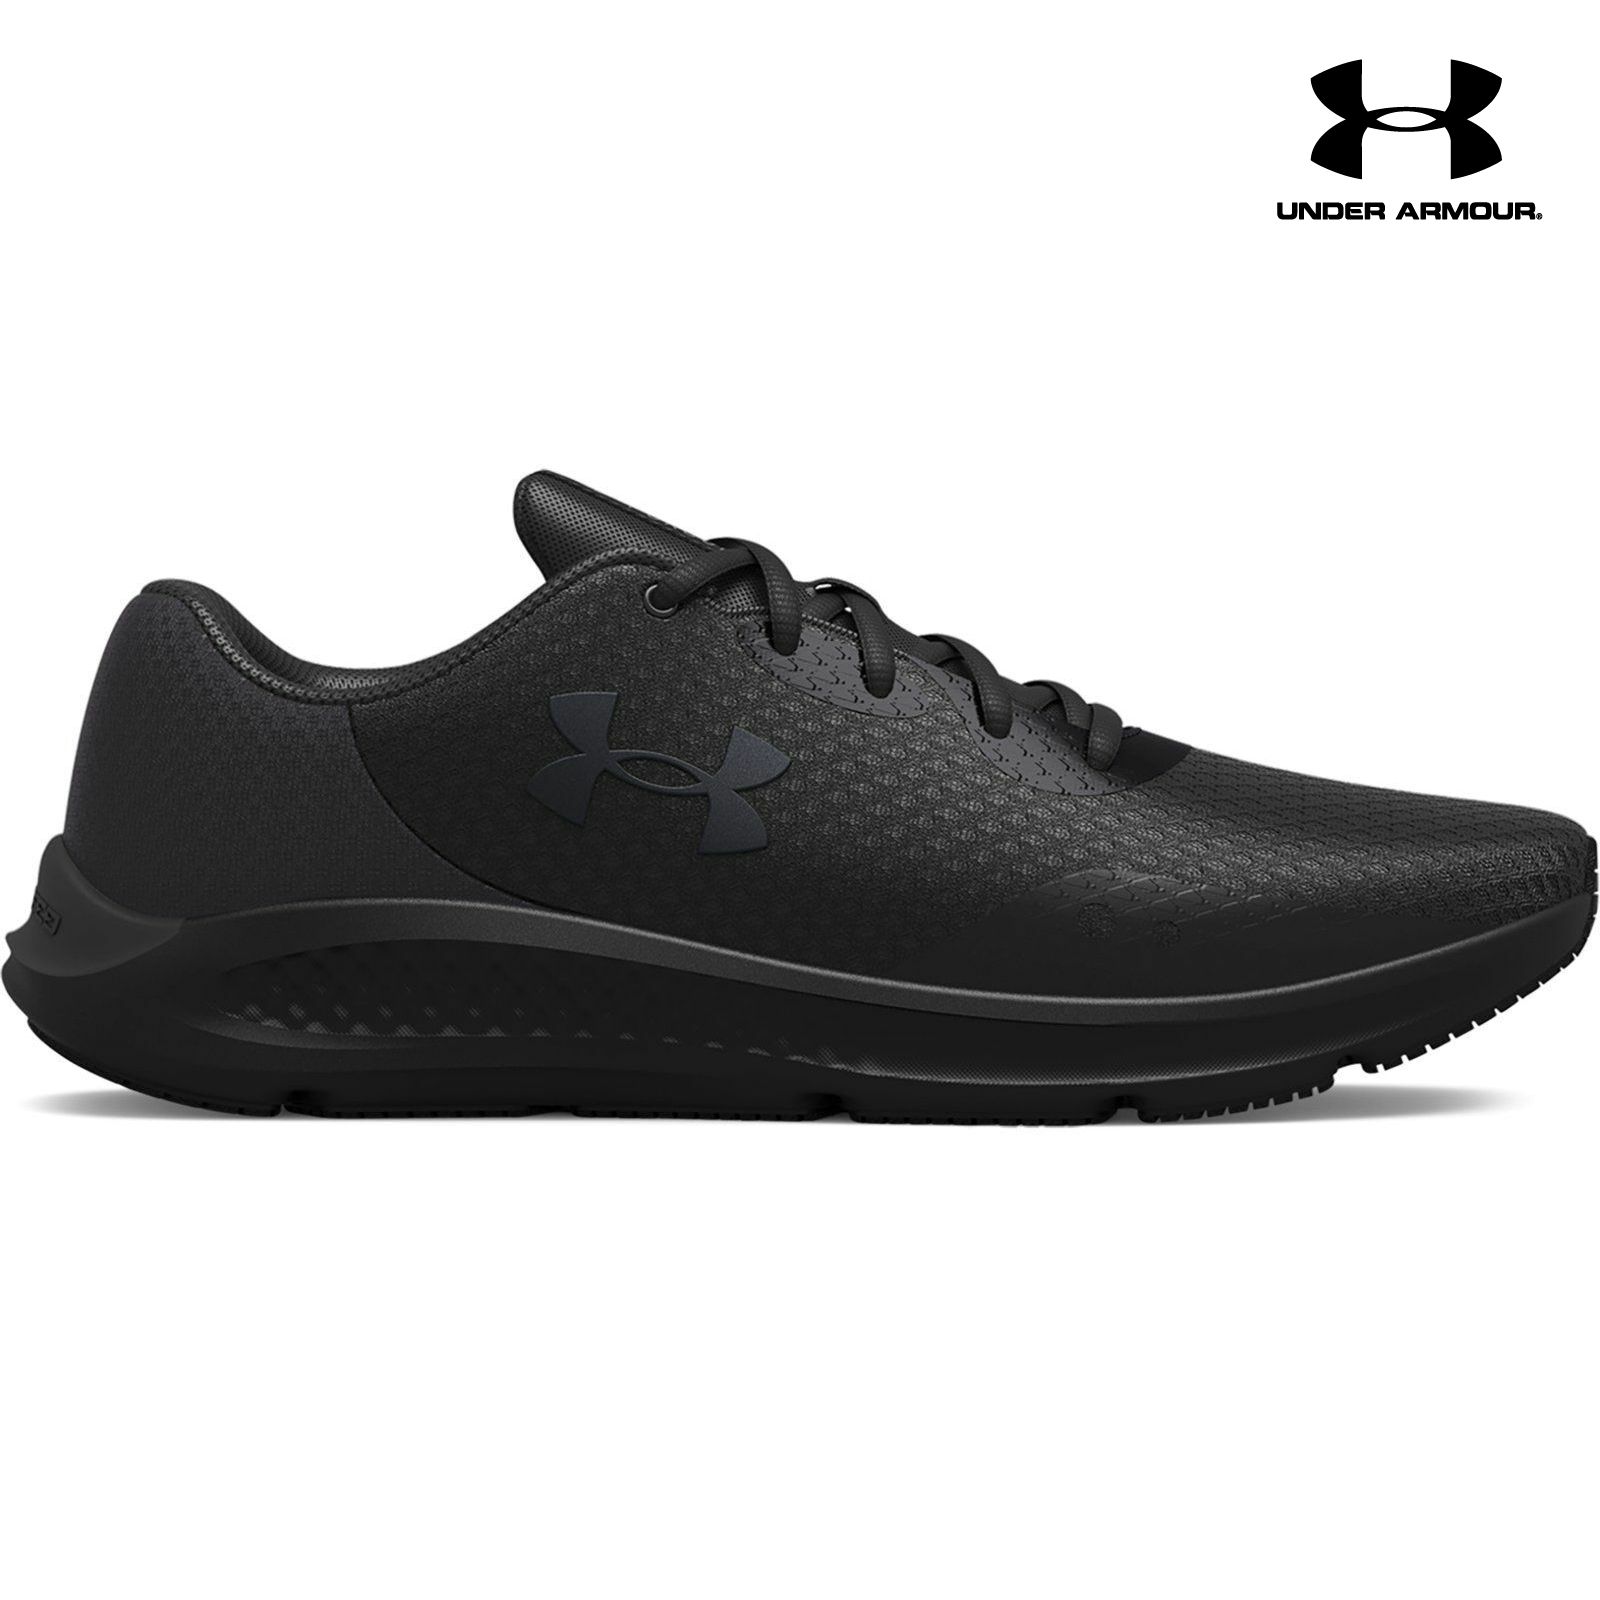 Under Armour Charged Pursuit 3   - Football boots & equipment